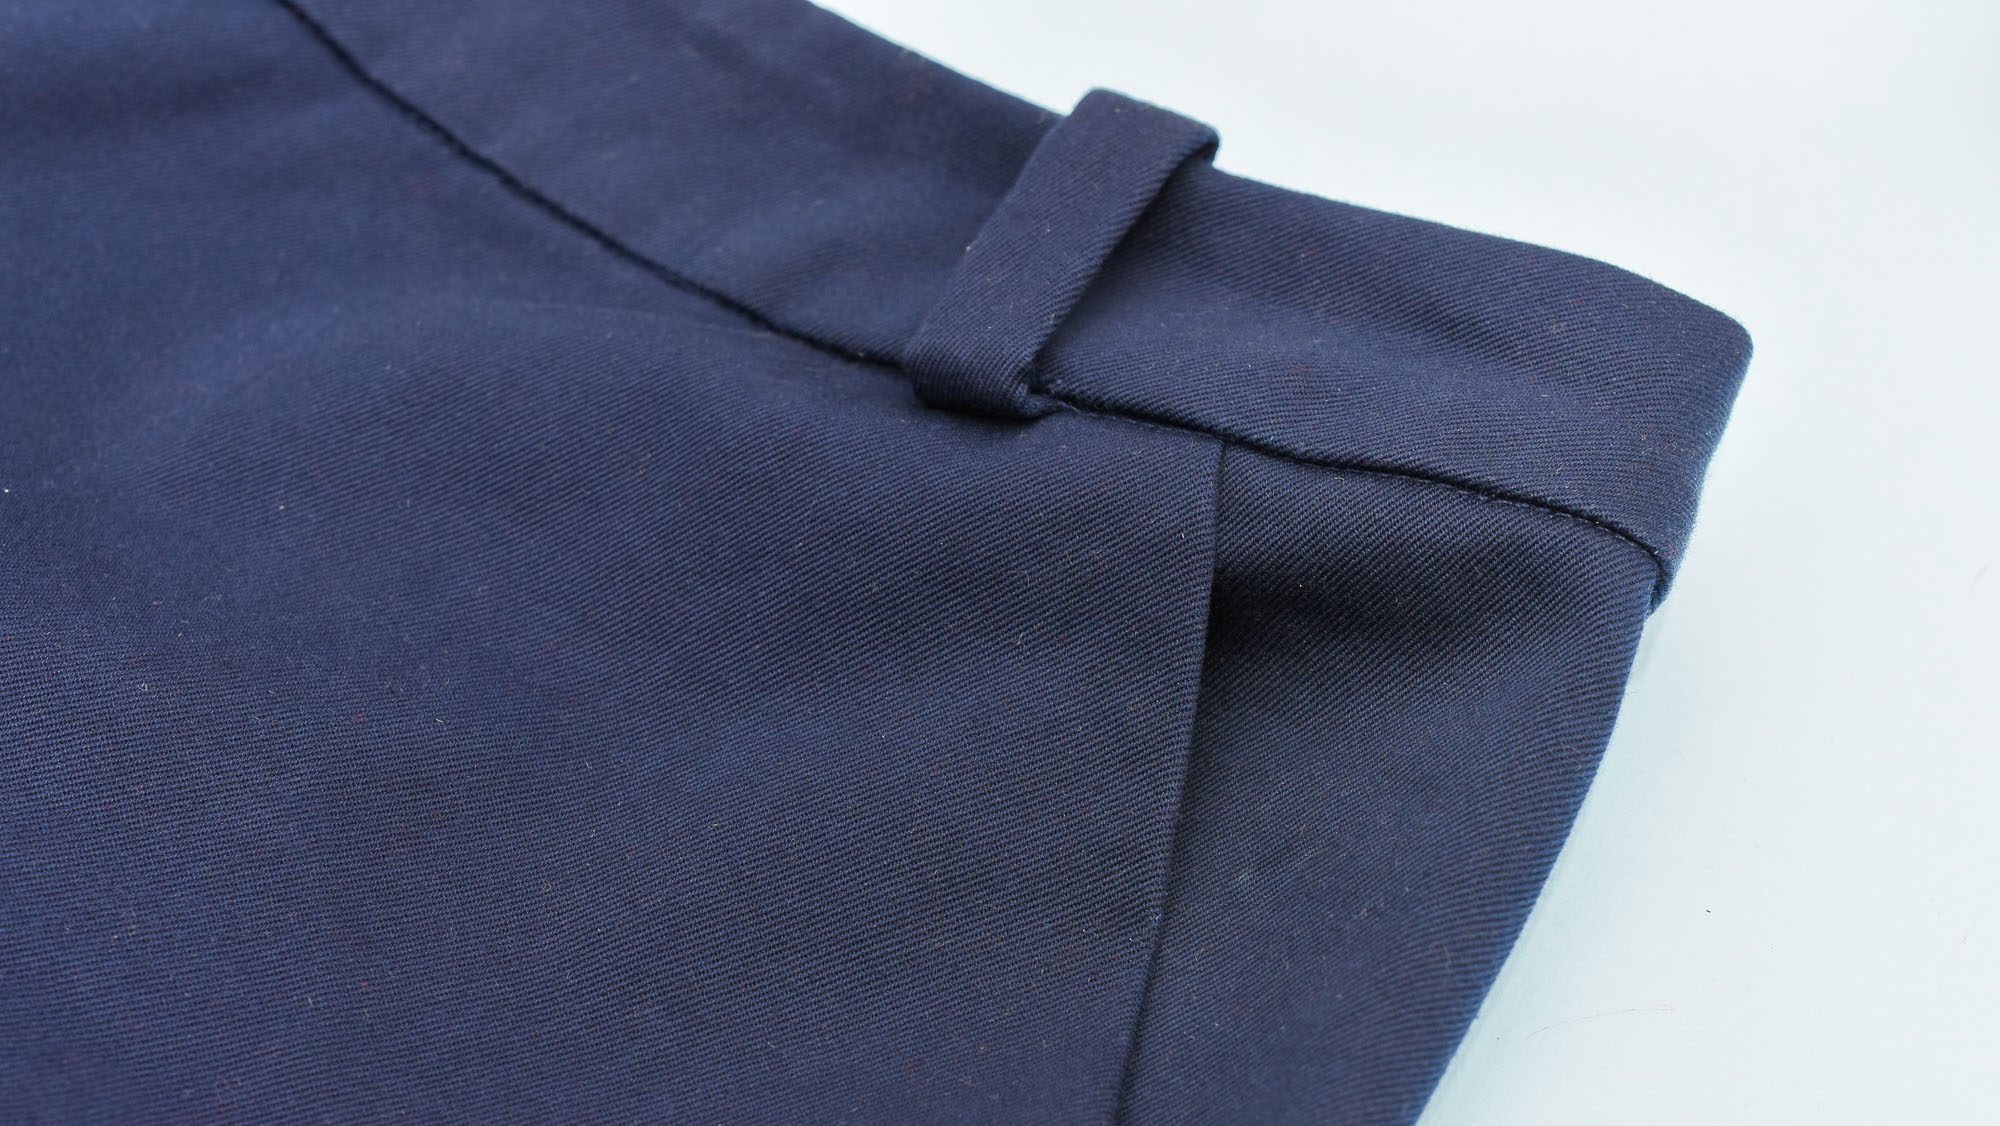 Sewing a curved waistband that rivals RTW - The Last Stitch